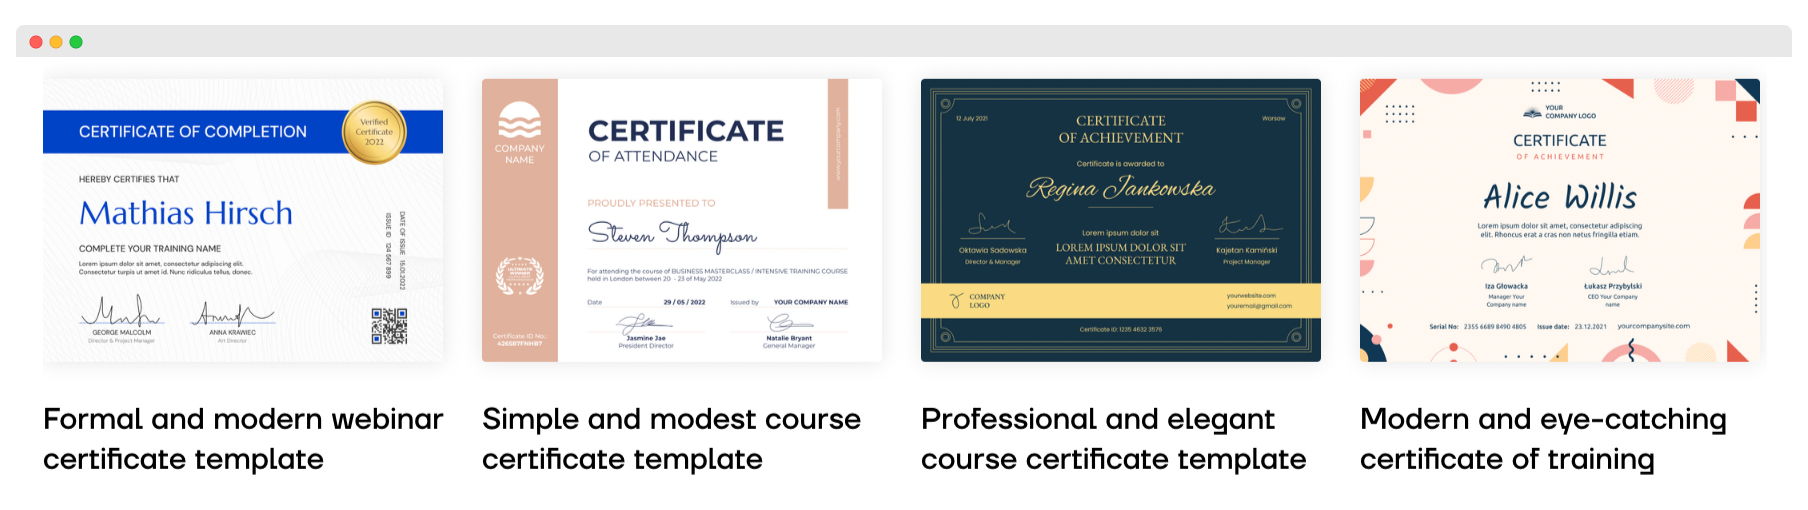 how to create customer certificates - tips and tricks_certifier blog_library of templates.png